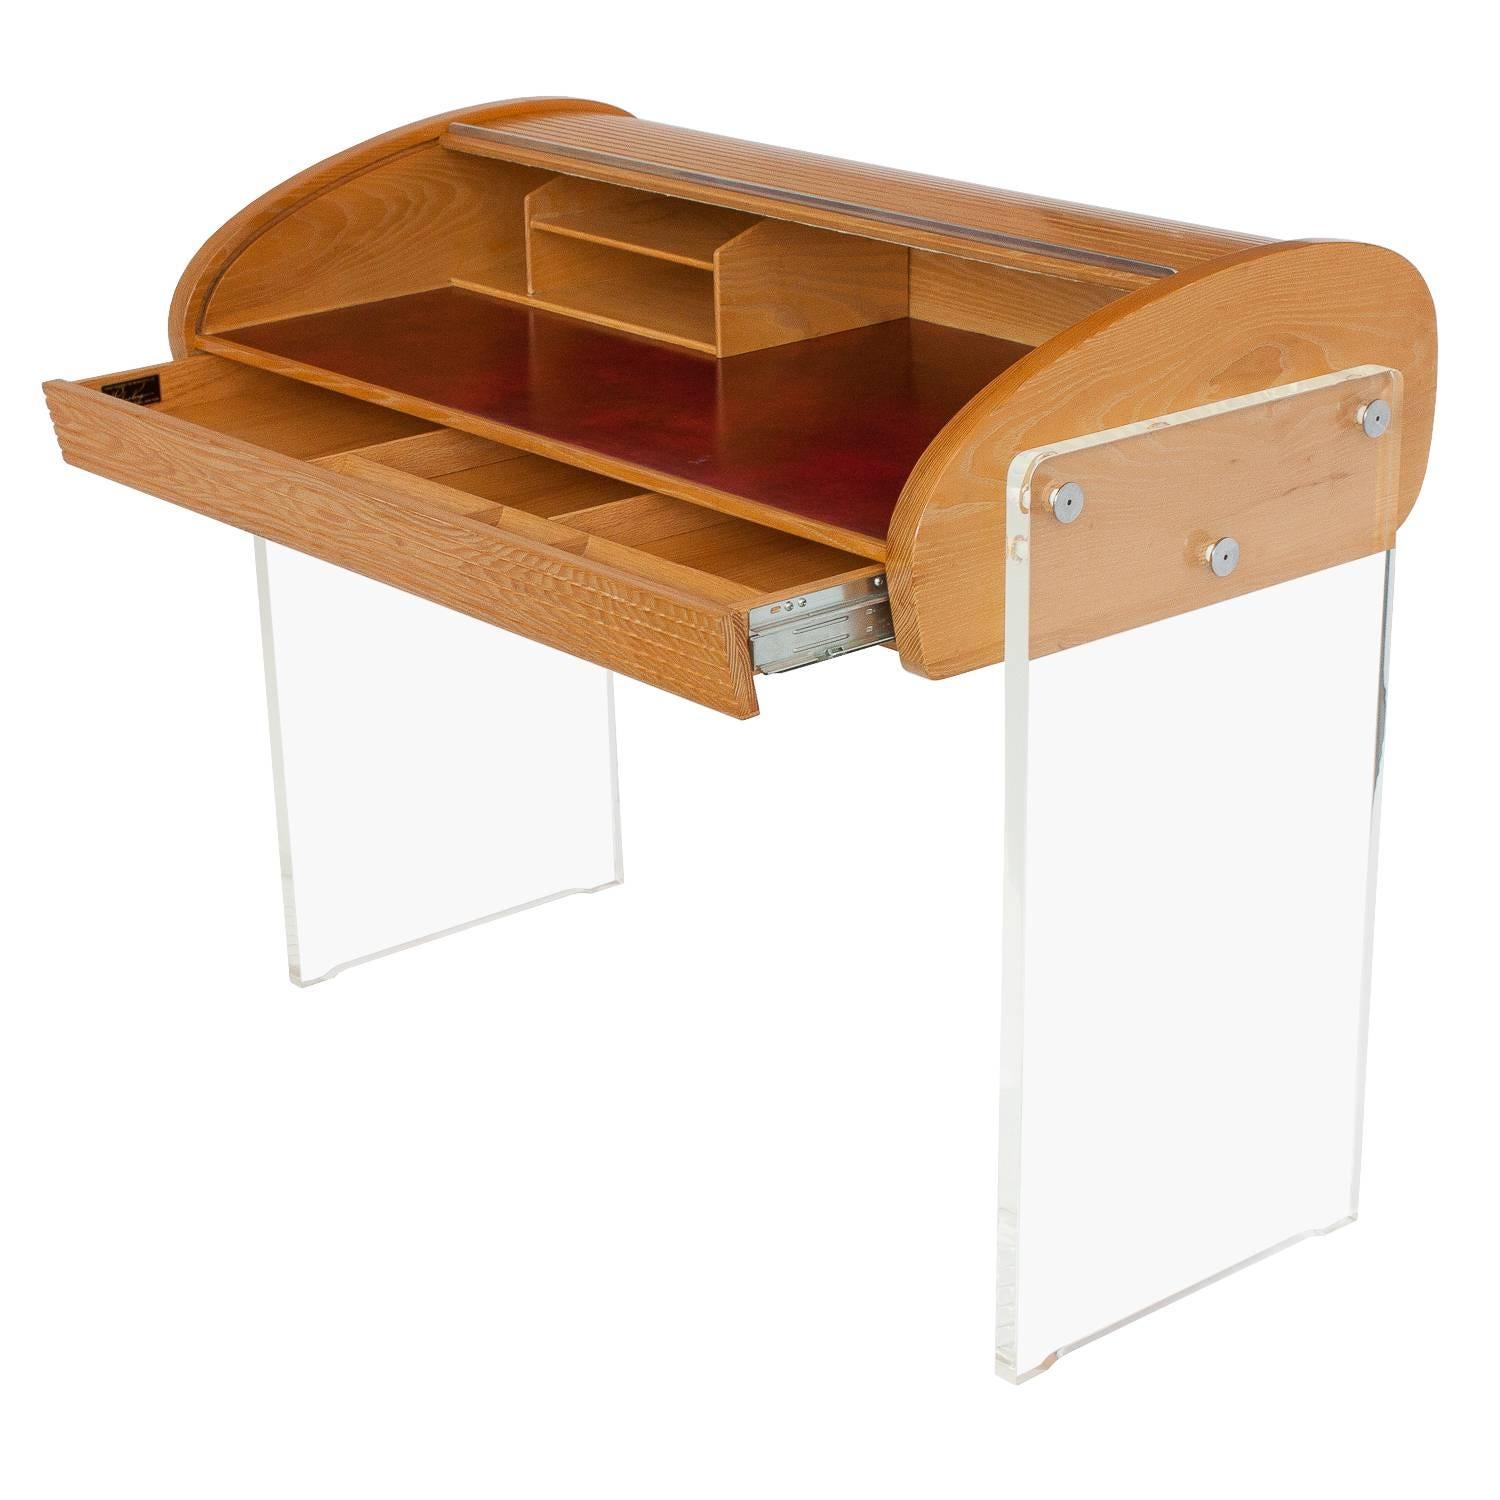 Vladimir Kagan roll-top writing desk, model P 902. 

A roll-top writing desk in oak with Lucite legs and leather writing surface. The desk features a tambour roll top concealing a red leather writing surface and letter organizer. One integrated